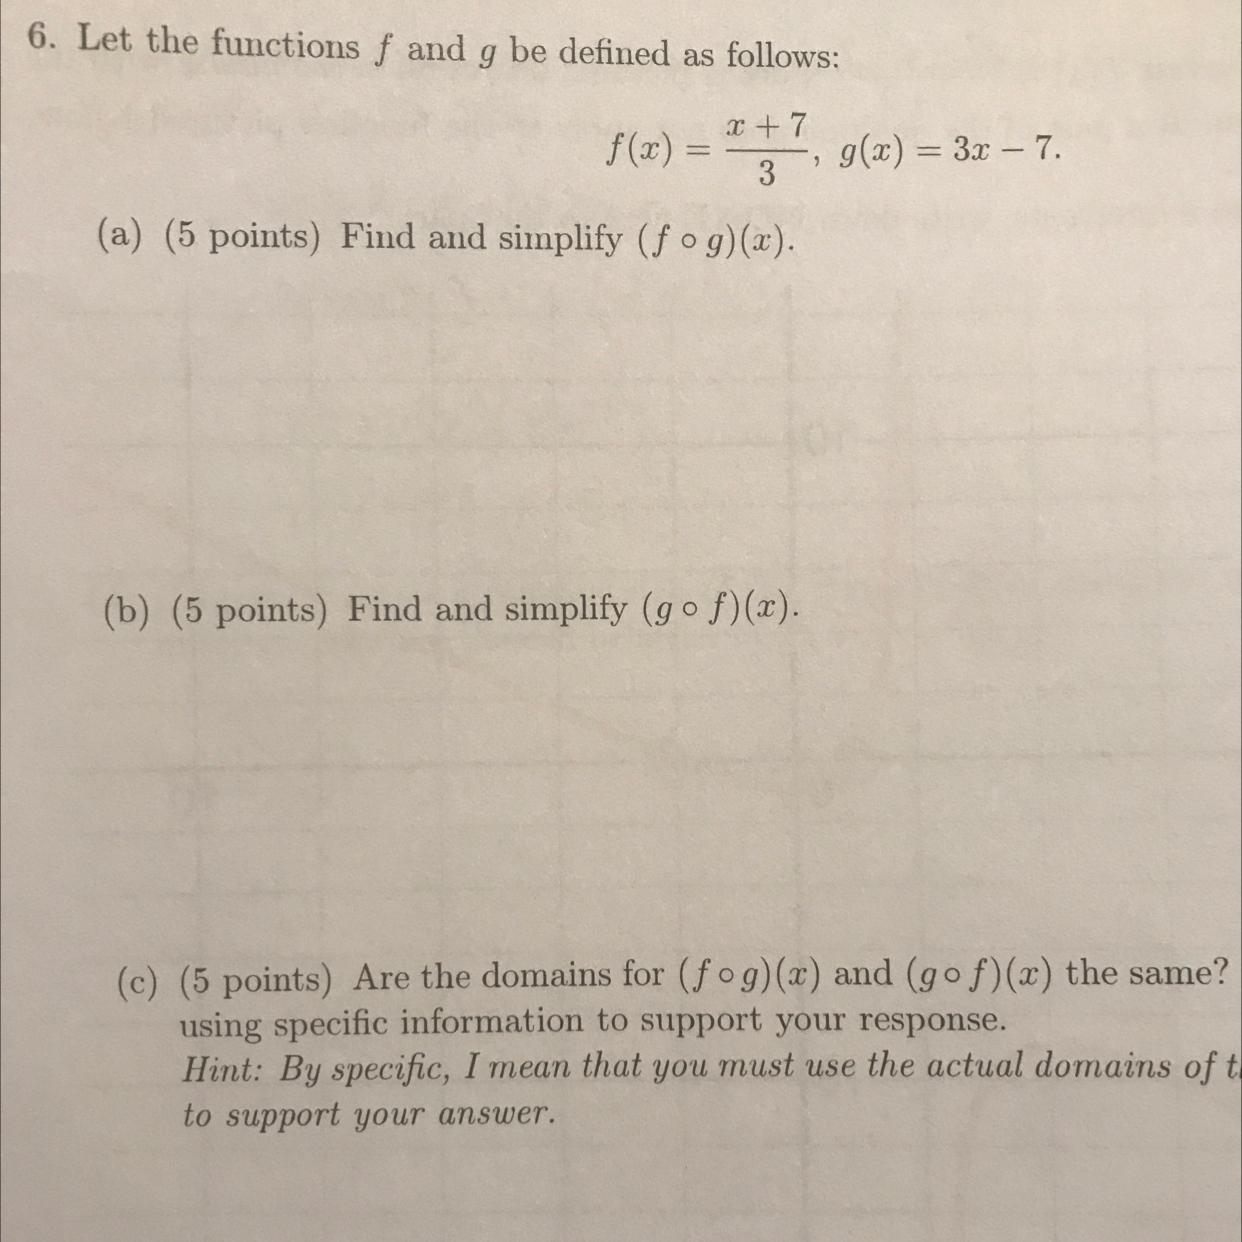 Ignore C. I Only Need Help With A And B 